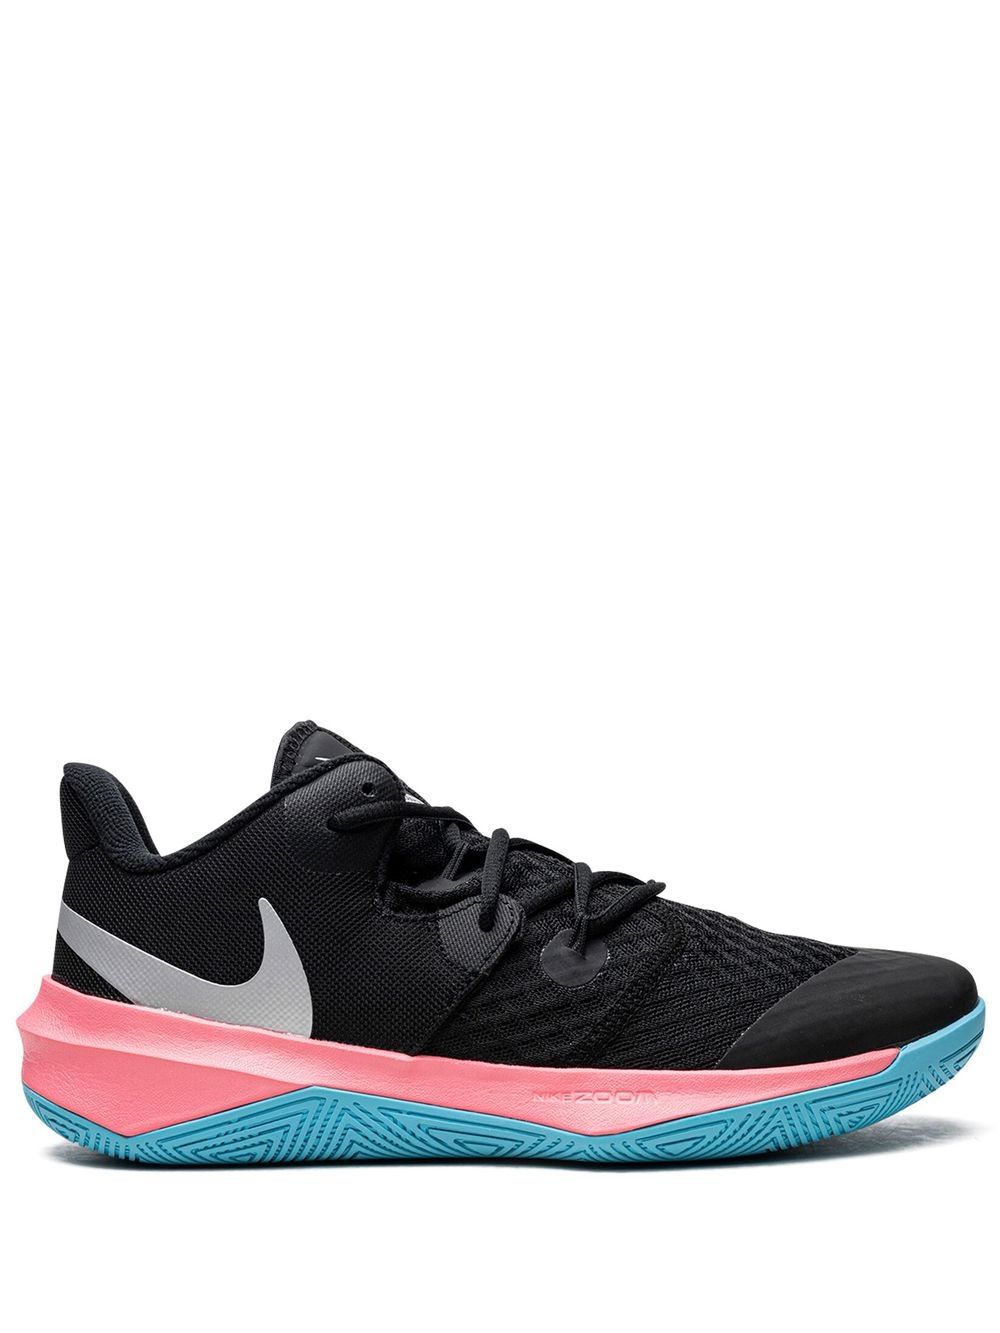 Nike Zoom Hyperspeed Court Trainers In Black